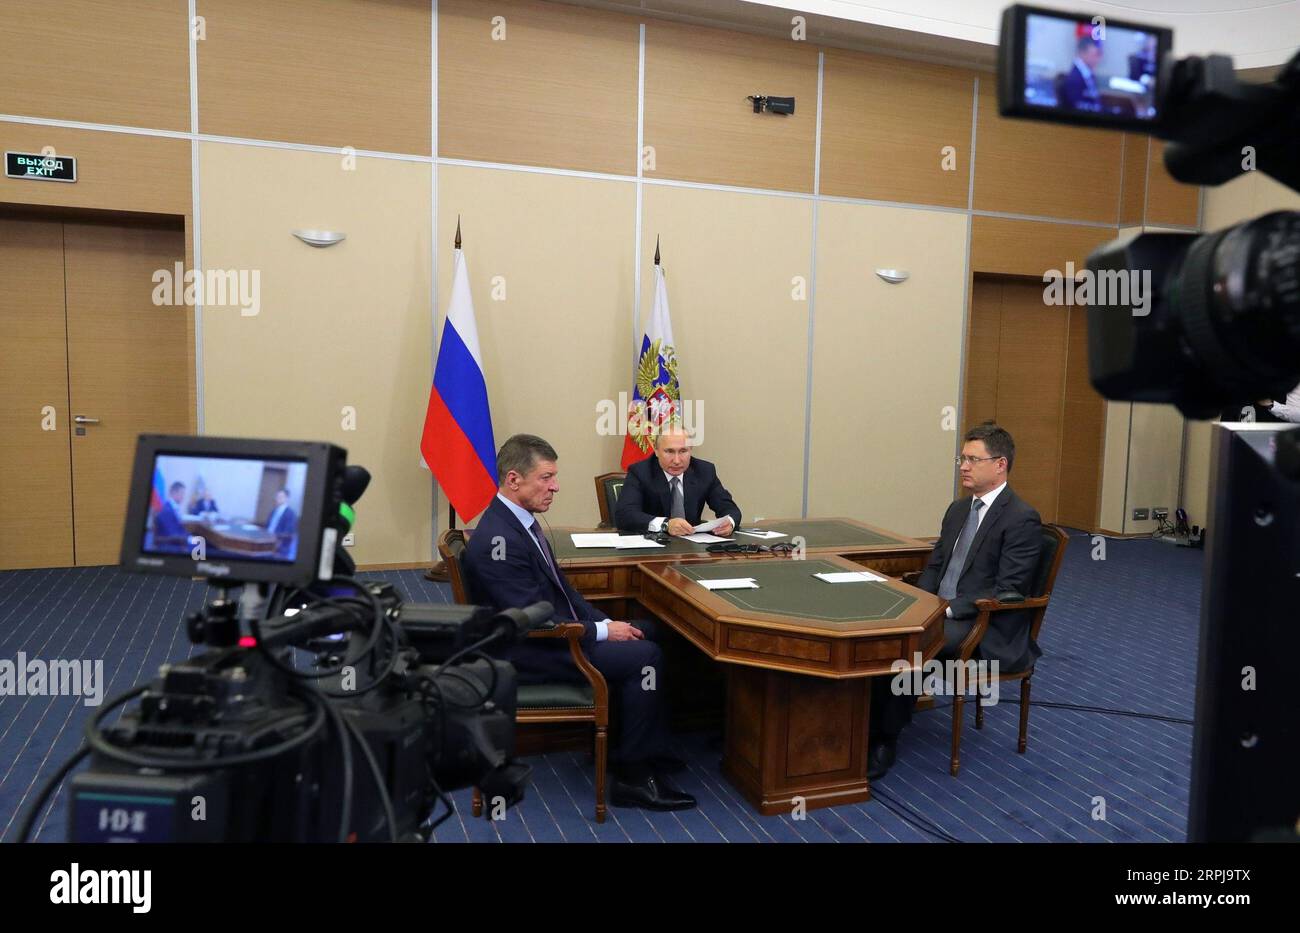 191202 -- MOSCOW, Dec. 2, 2019 Xinhua -- Russian President Vladimir Putin C, Russian Energy Minister Alexander Novak R and Deputy Prime Minister Dmitry Kozak watch the launching ceremony of the China-Russia east-route natural gas pipeline via teleconference in Sochi, Russia, Dec. 2, 2019. Chinese President Xi Jinping had a video call with his Russian counterpart Vladimir Putin Monday afternoon, as the two heads of state jointly witnessed the launching ceremony of the China-Russia east-route natural gas pipeline. Sputnik/Handout via Xinhua RUSSIA-CHINA-PUTIN-NATURAL GAS PIPELINE-LAUNCH PUBLICAT Stock Photo